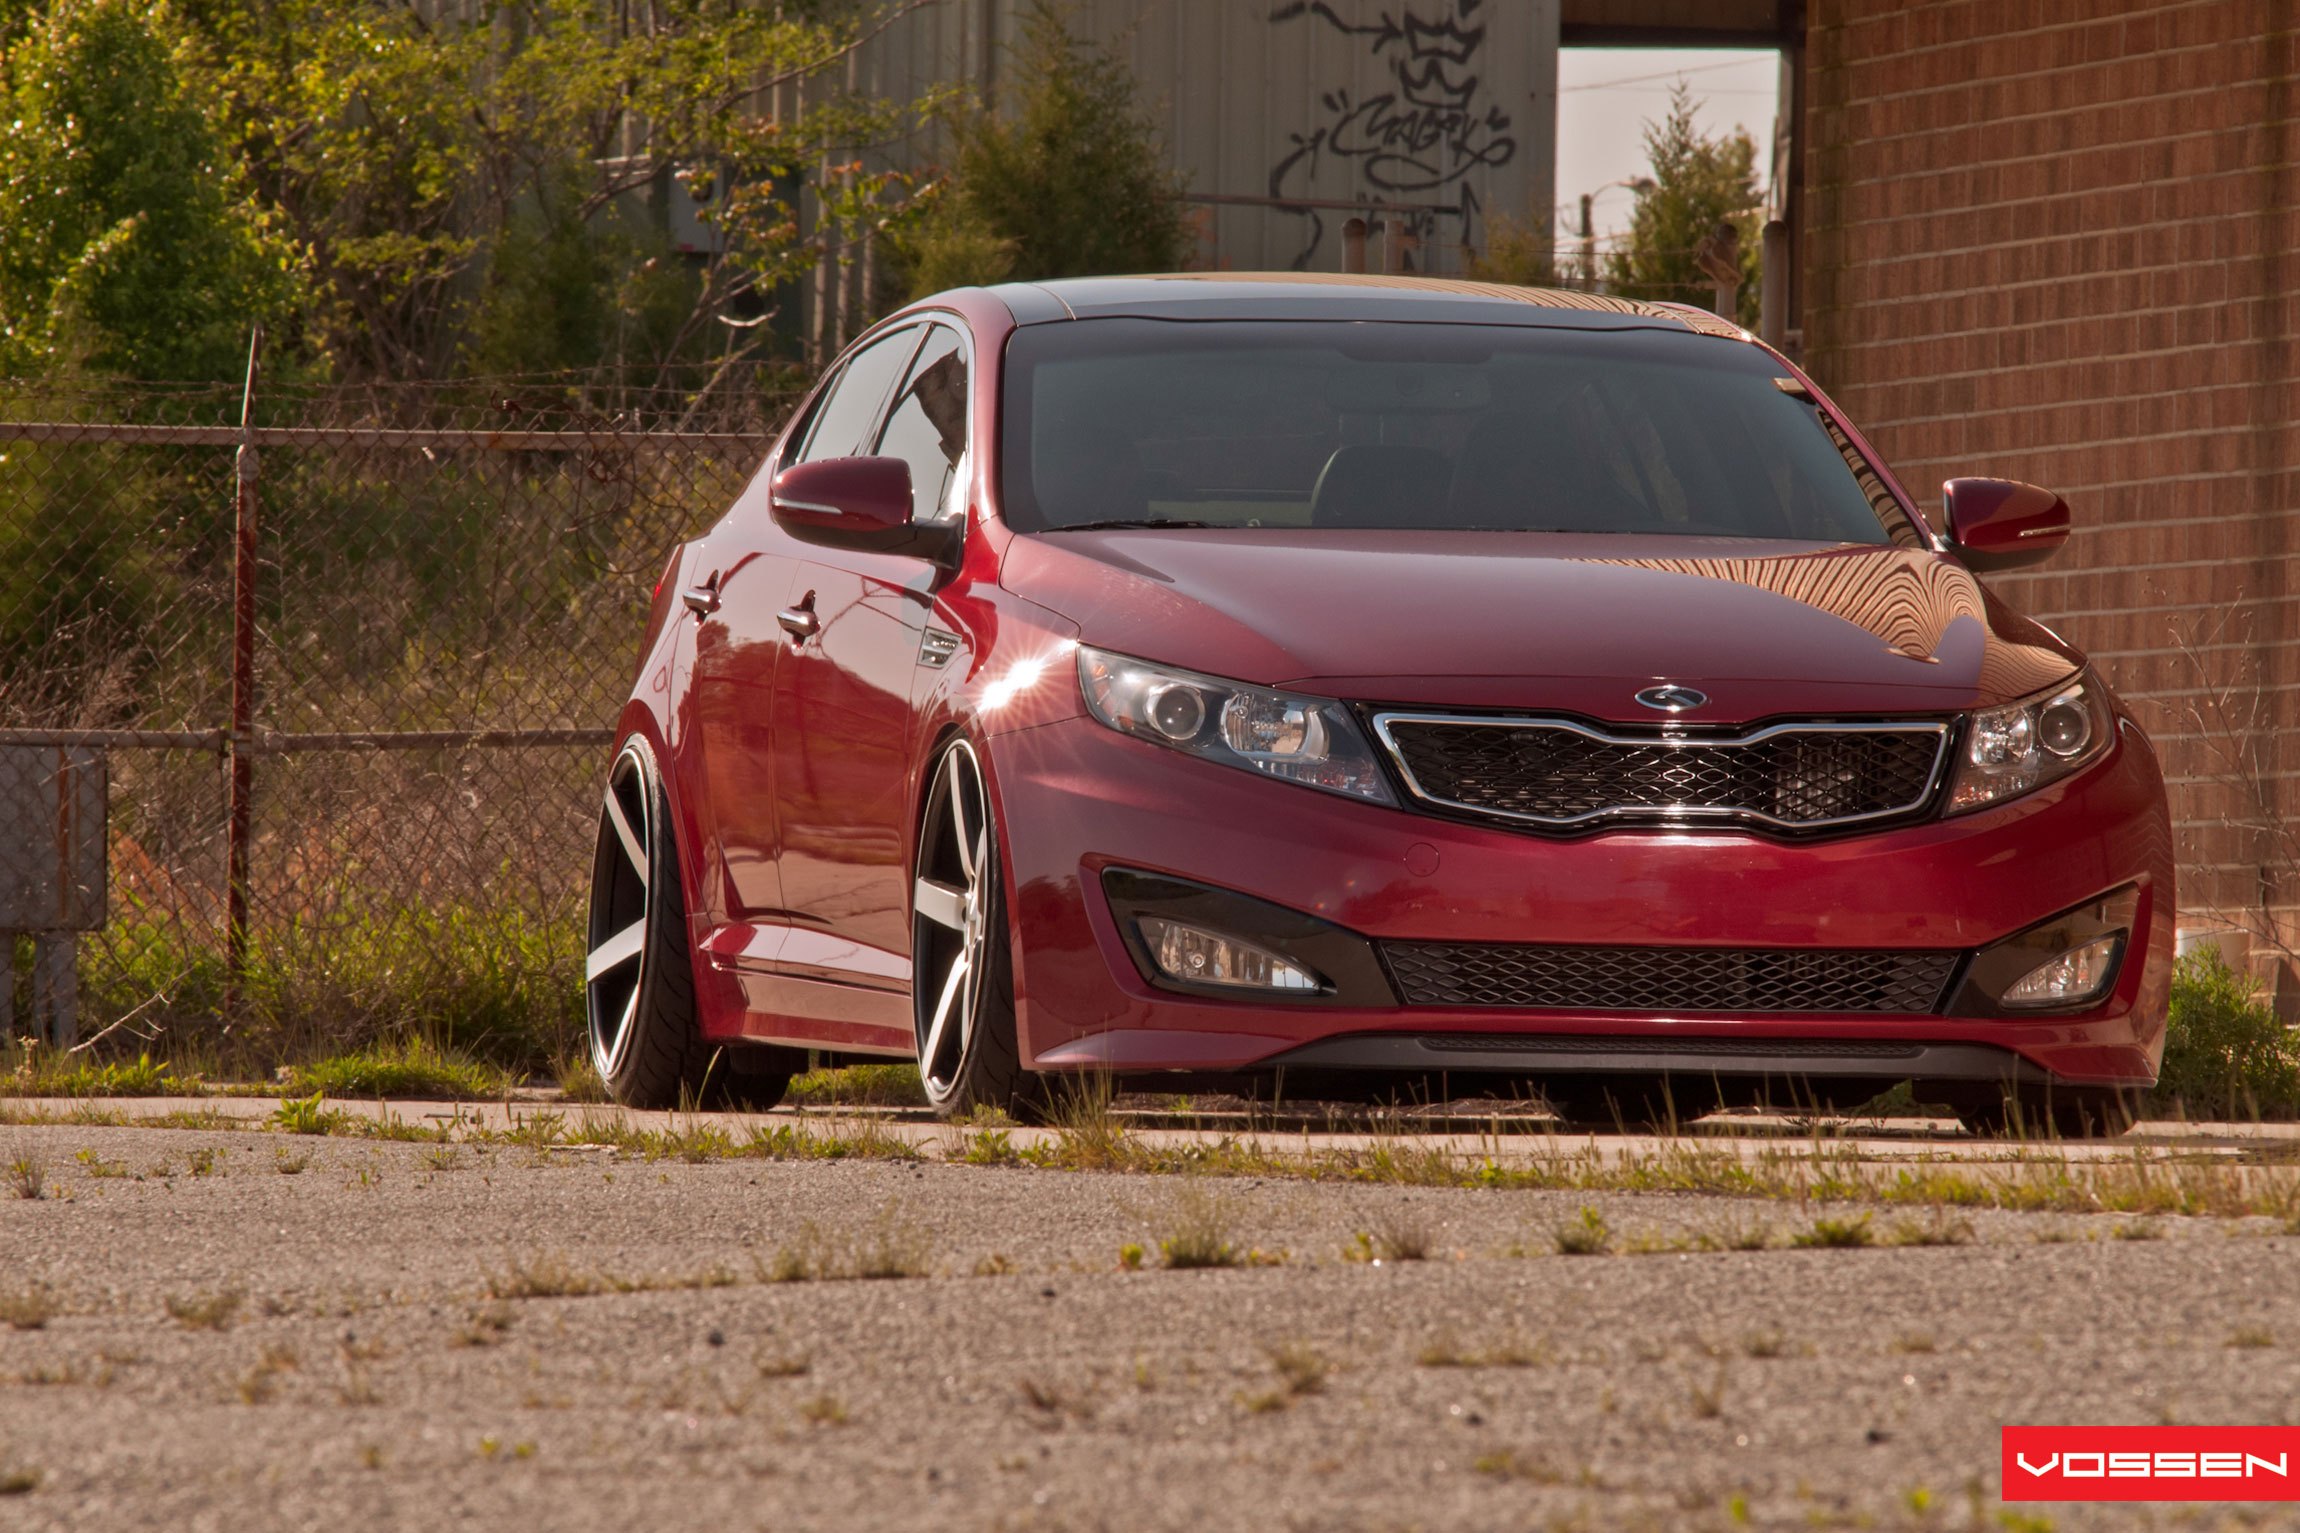 Red Kia Optima with Aftermarket Front Bumper - Photo by Vossen